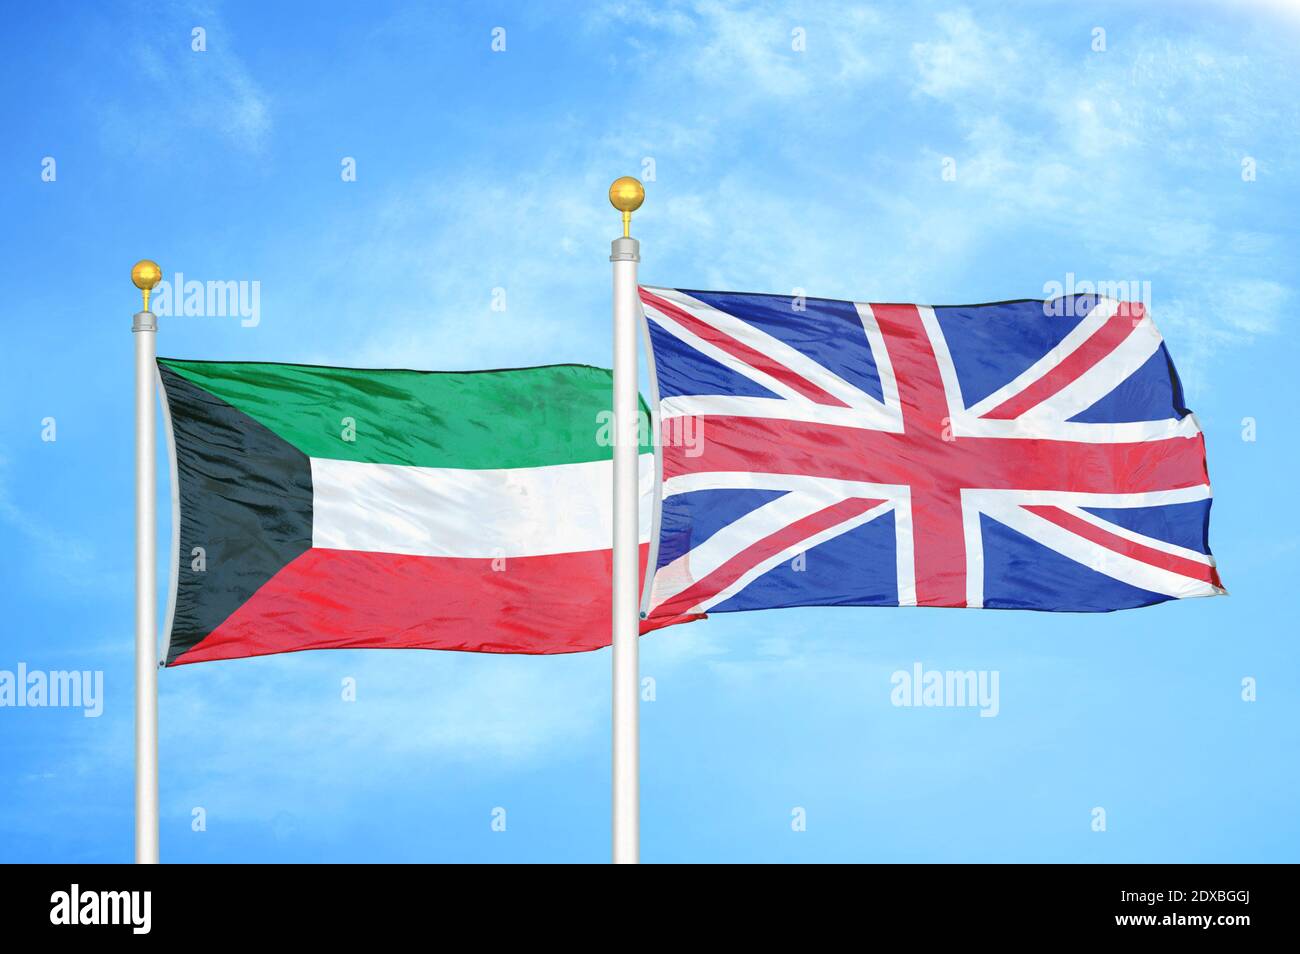 Kuwait and United Kingdom two flags on flagpoles and blue sky Stock Photo